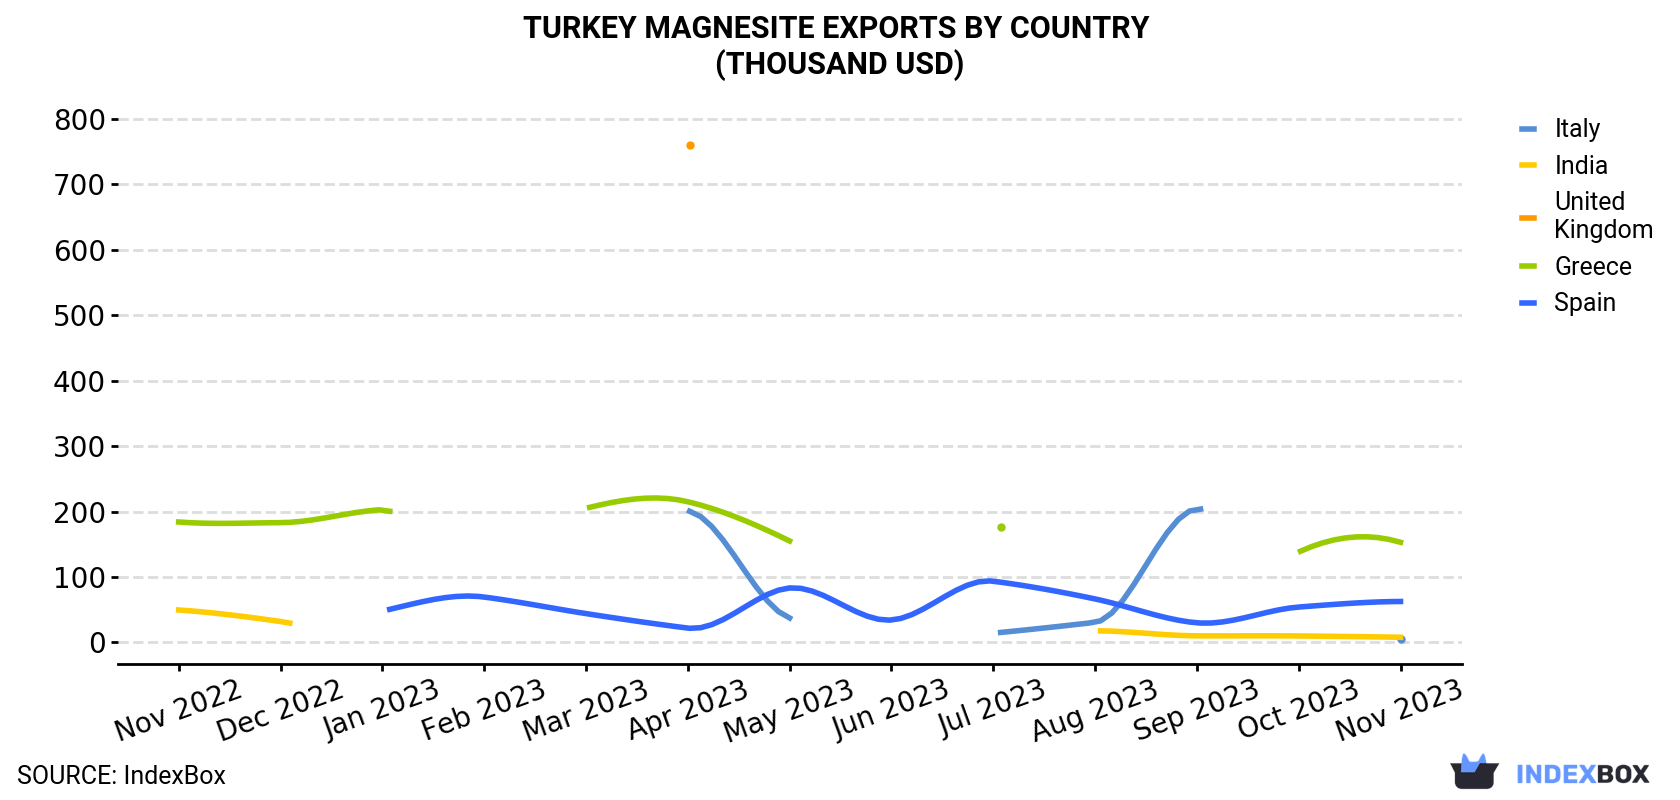 Turkey Magnesite Exports By Country (Thousand USD)